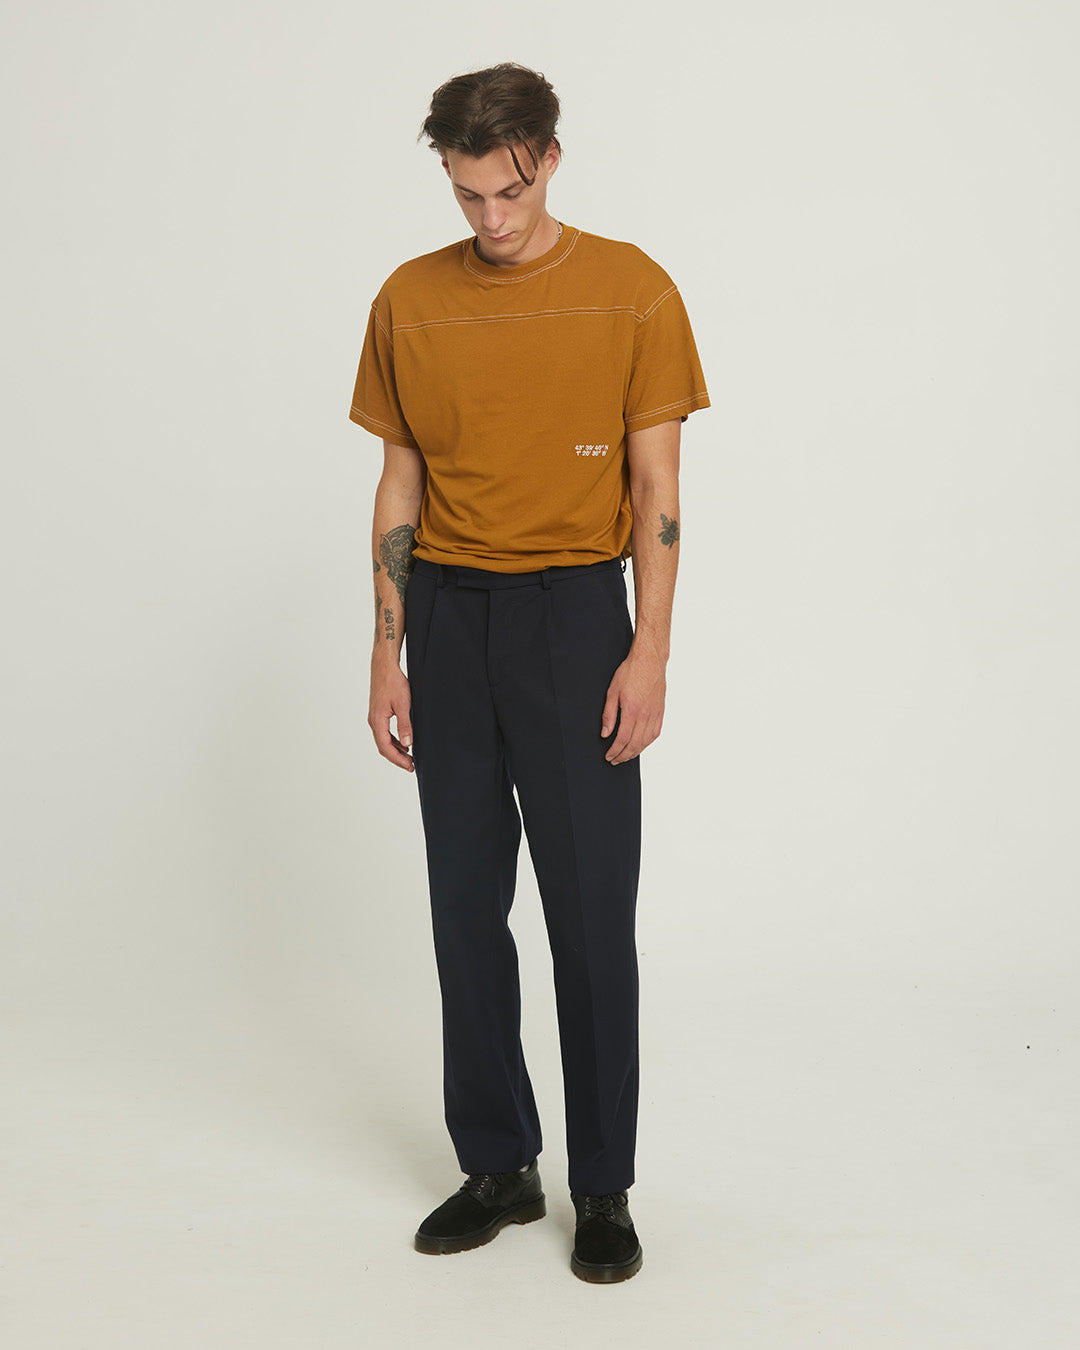 The trousers "Officer"